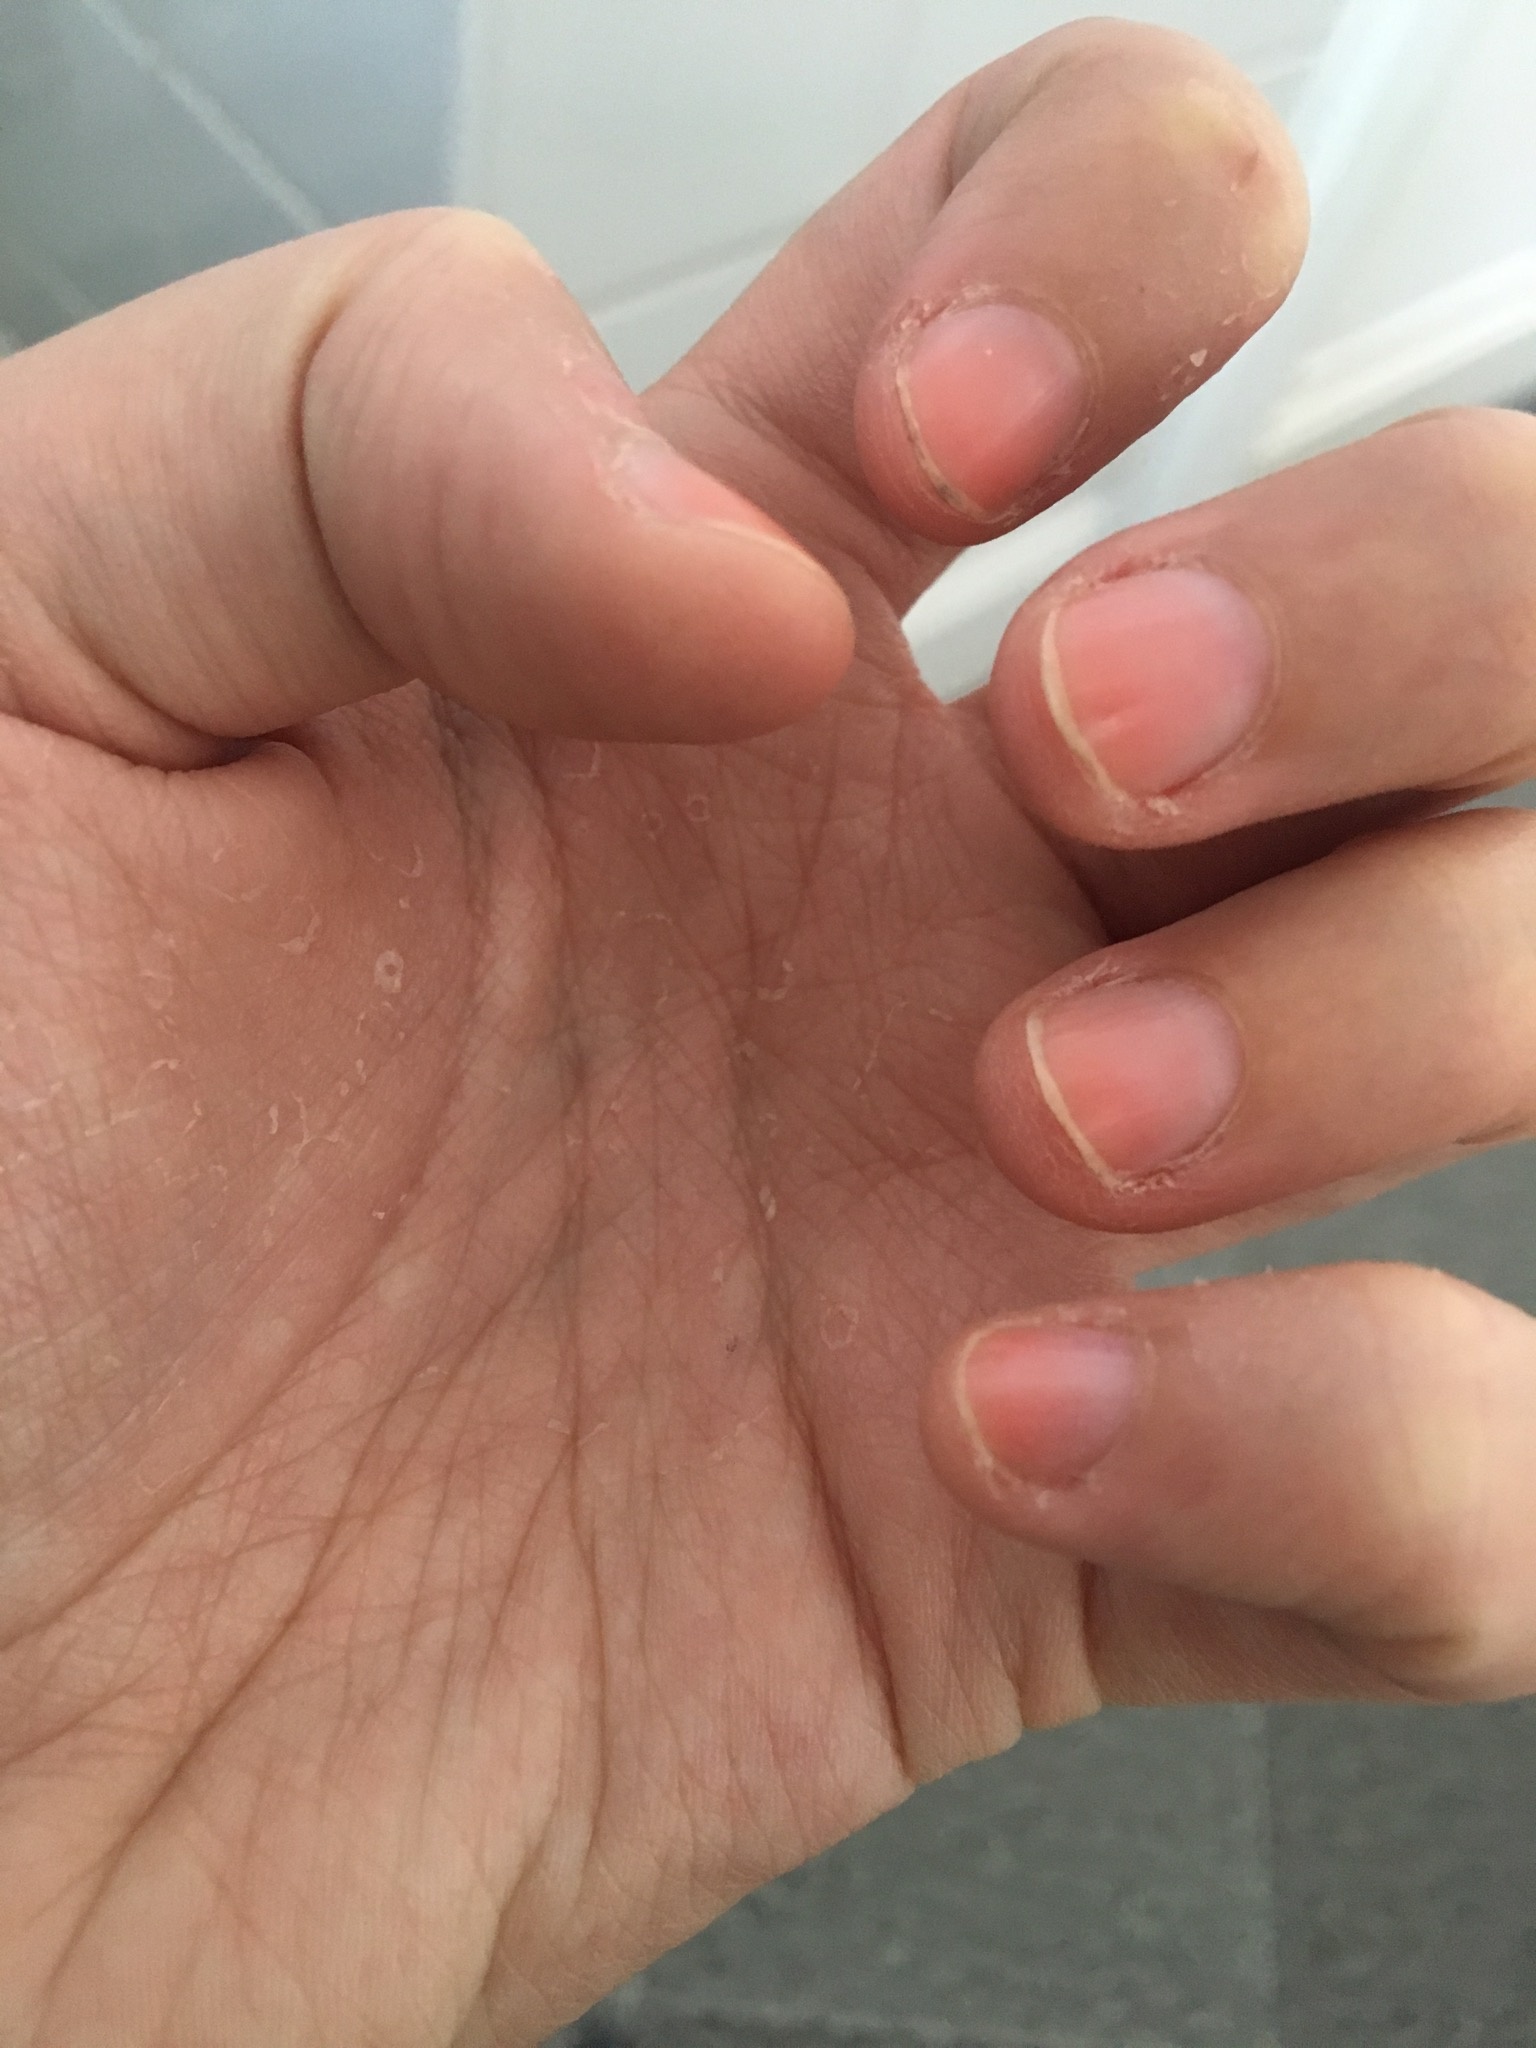 How to stop biting your nails - B+C Guides